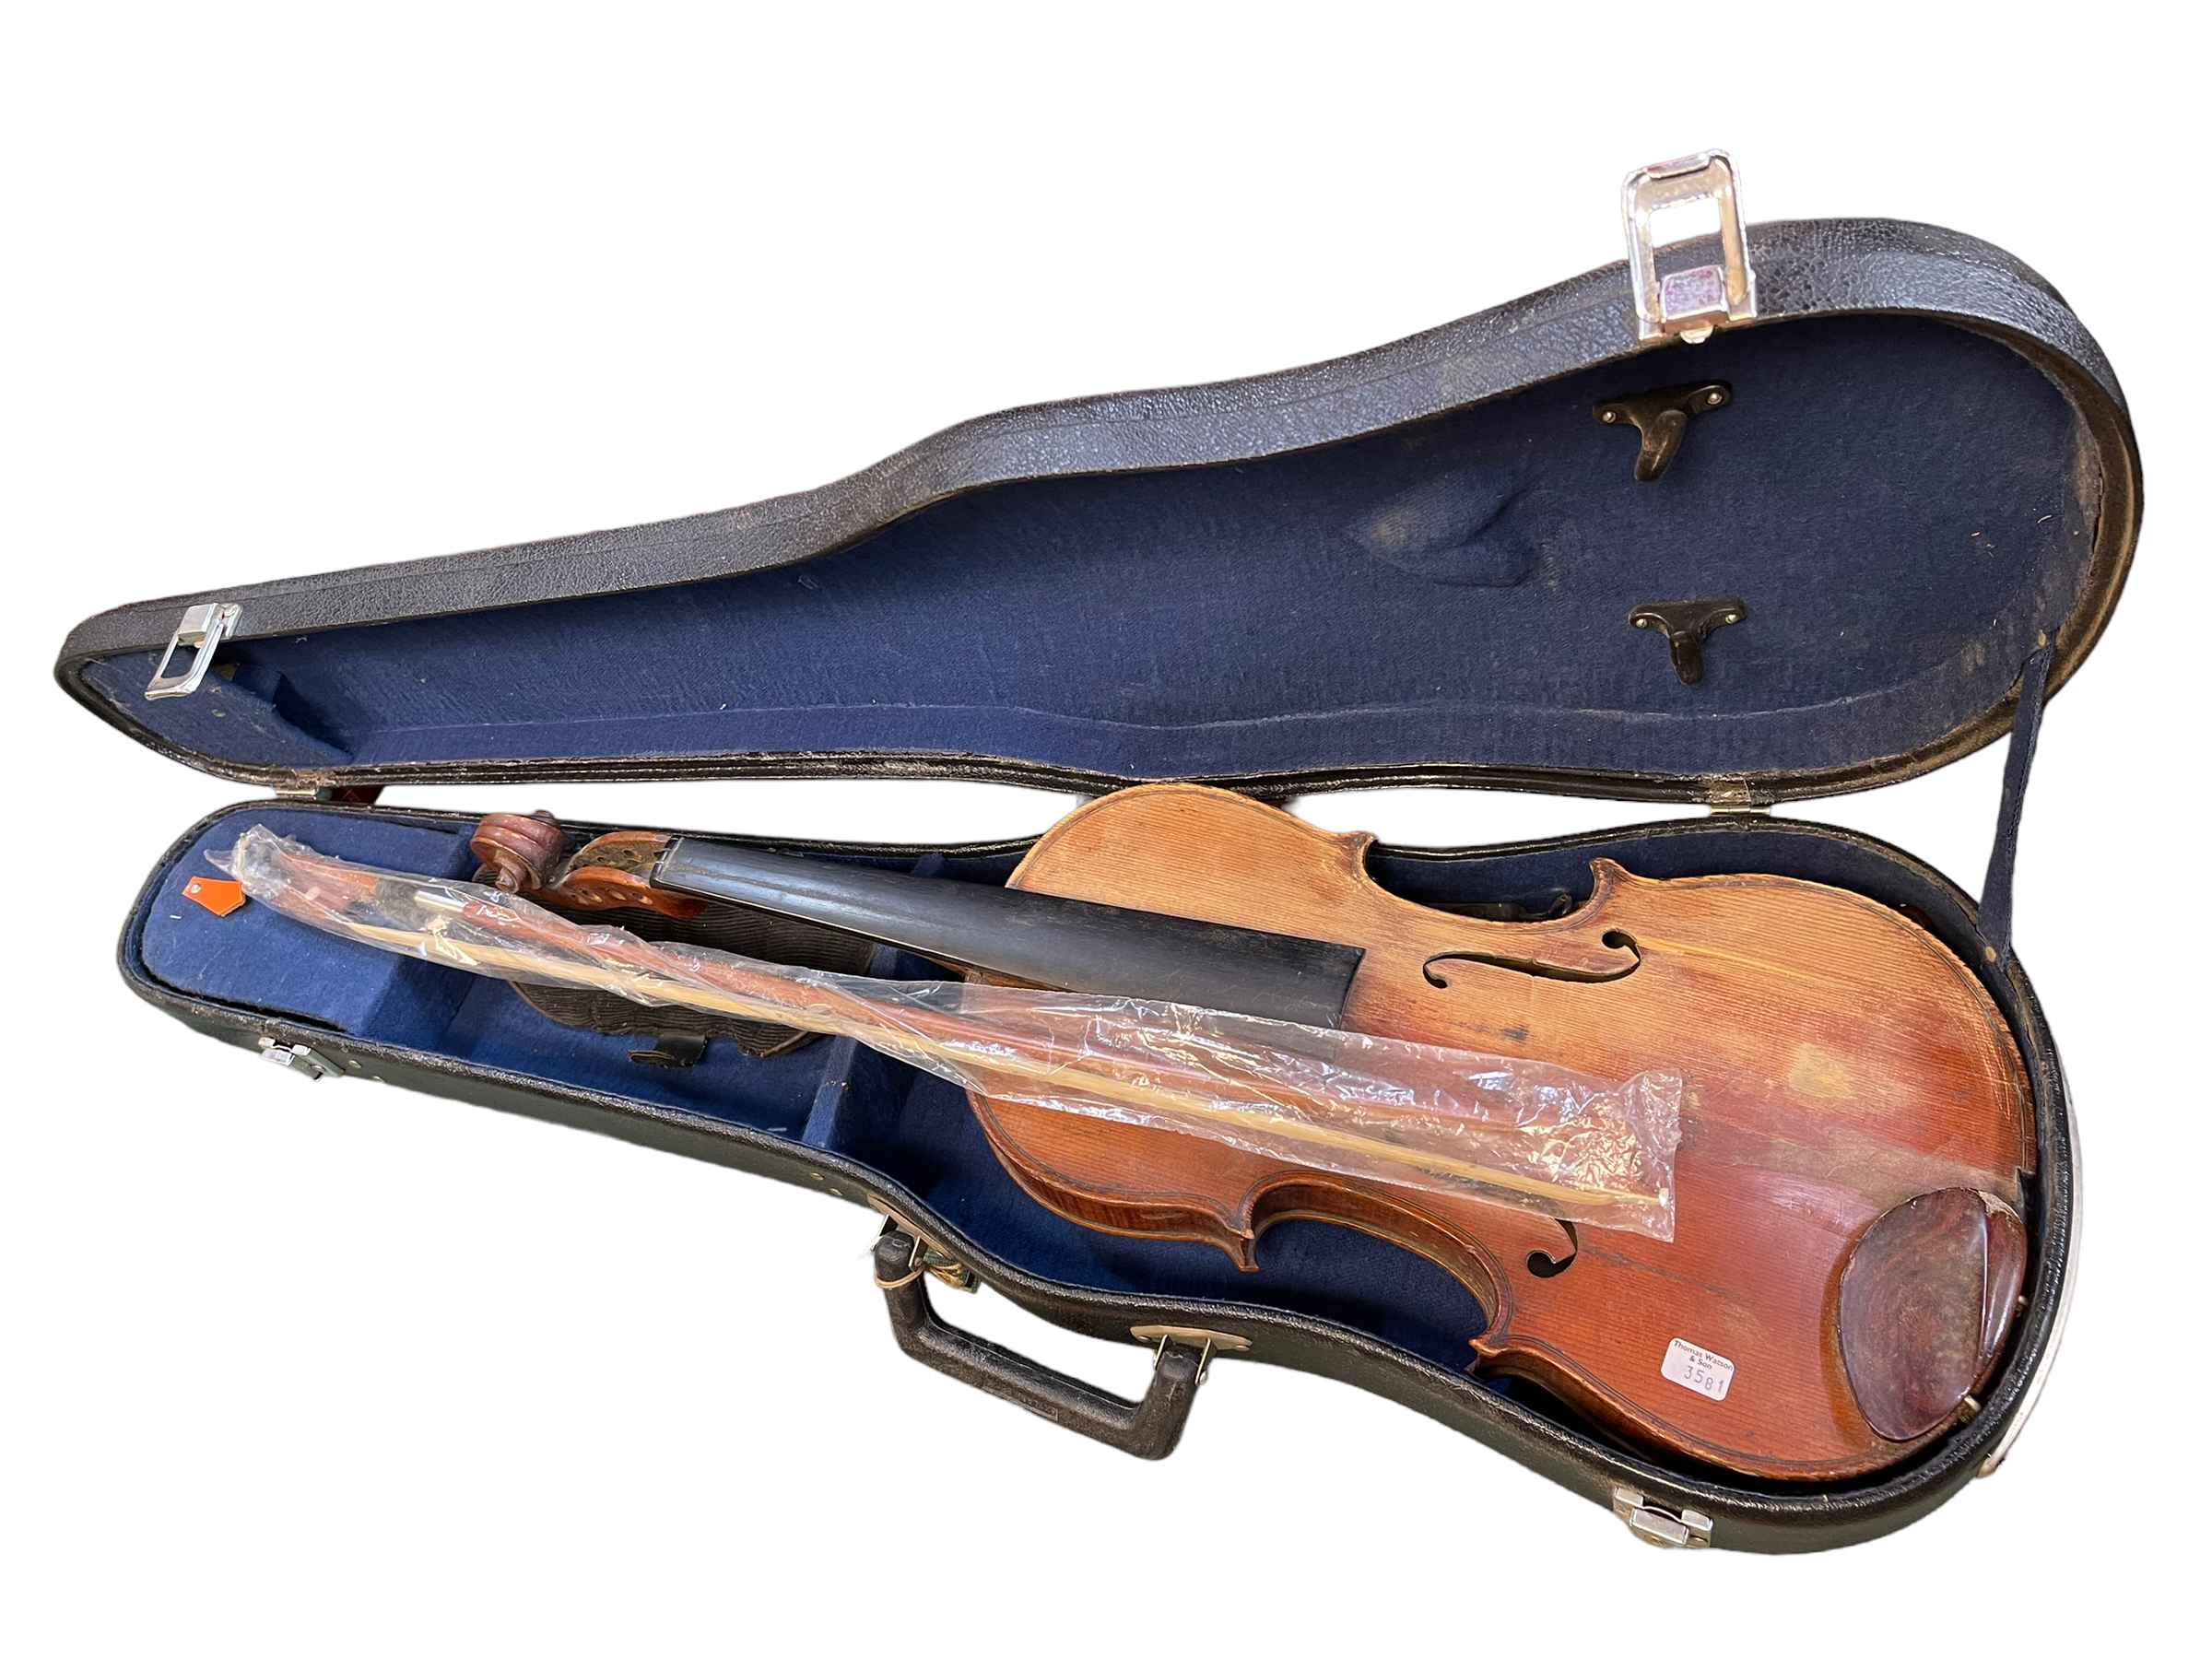 Goulding and Co. London, Violin with bow in case.